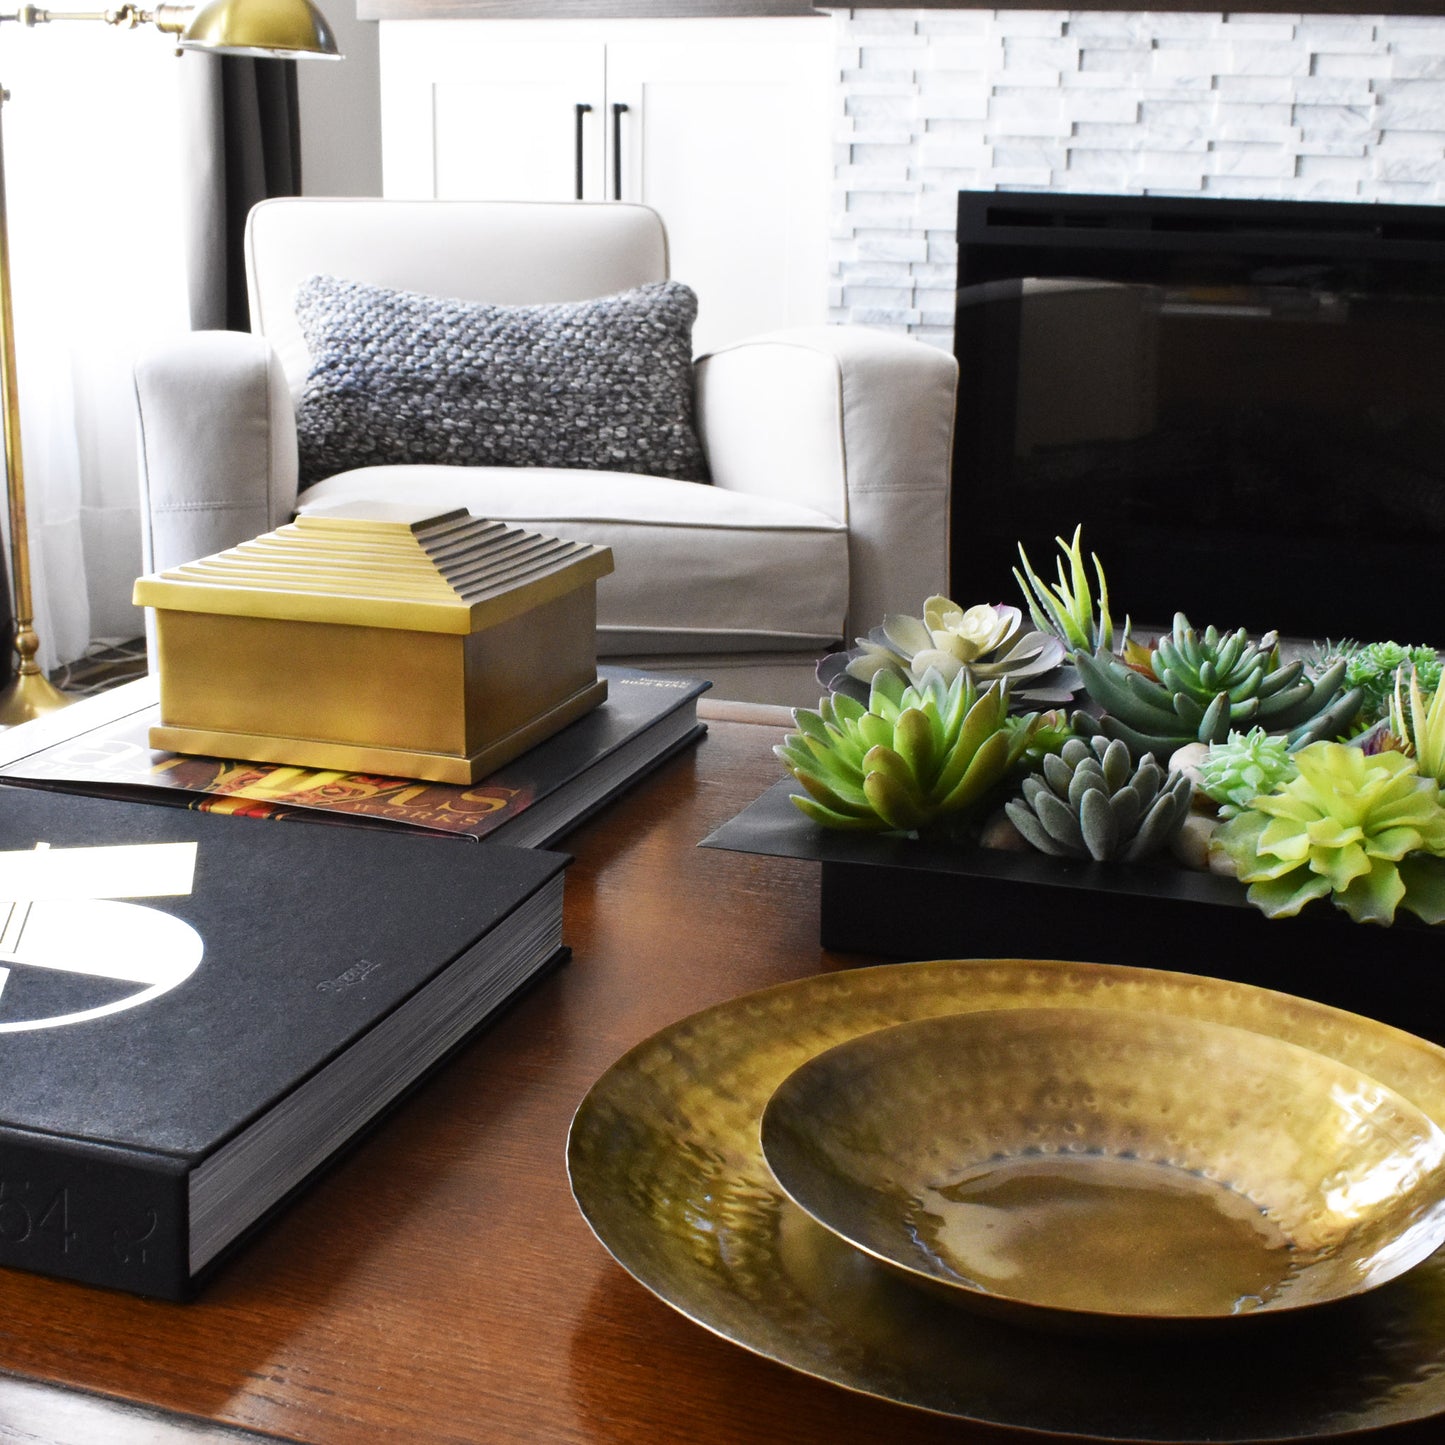 Nested antique finished round brass trays, brass pyramid box, succulents in black tray, in living room.